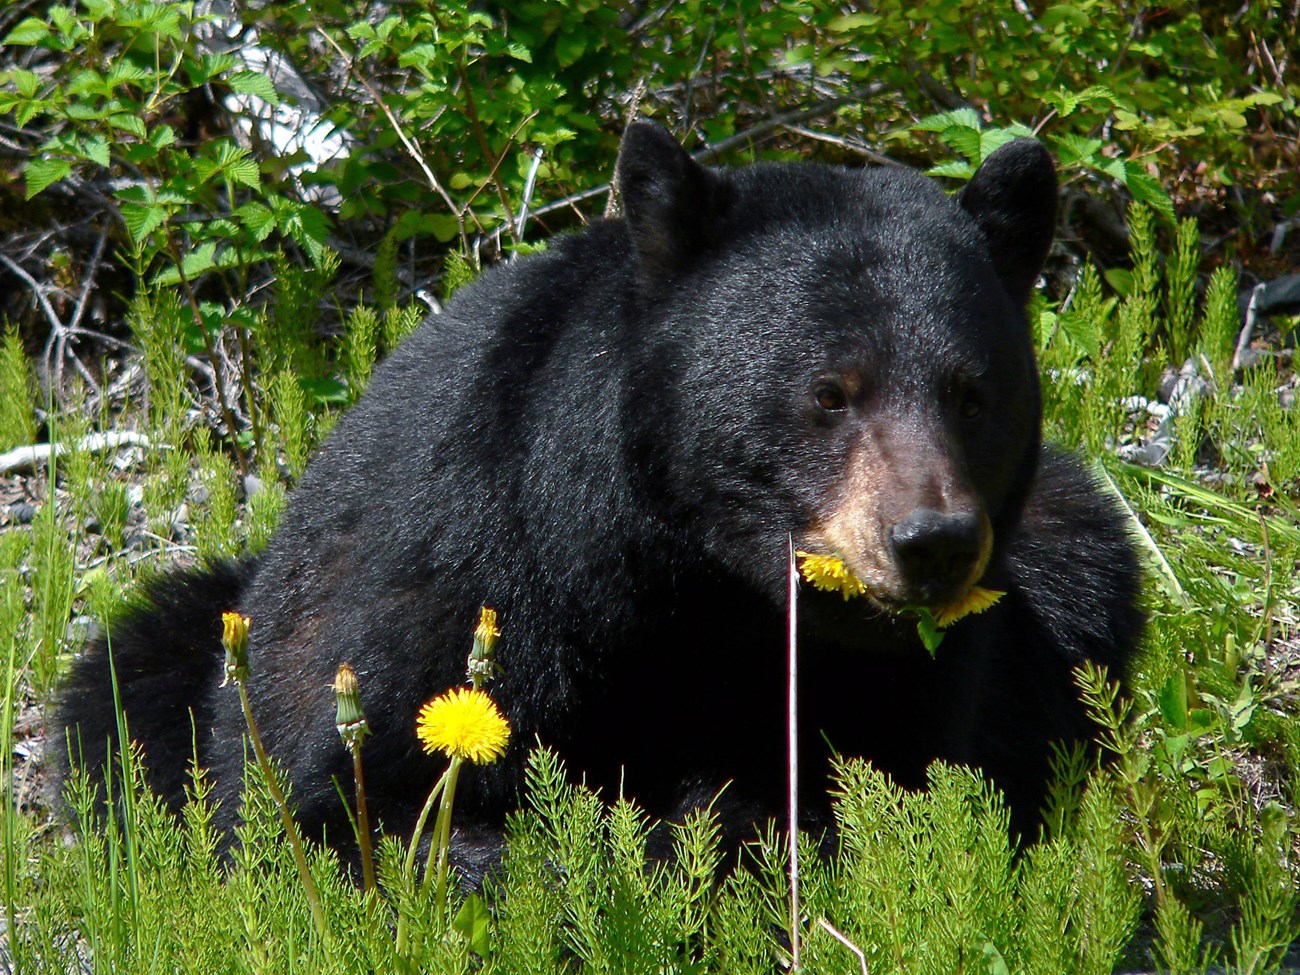 Black-colored black bear with a dandelion in its mouth.